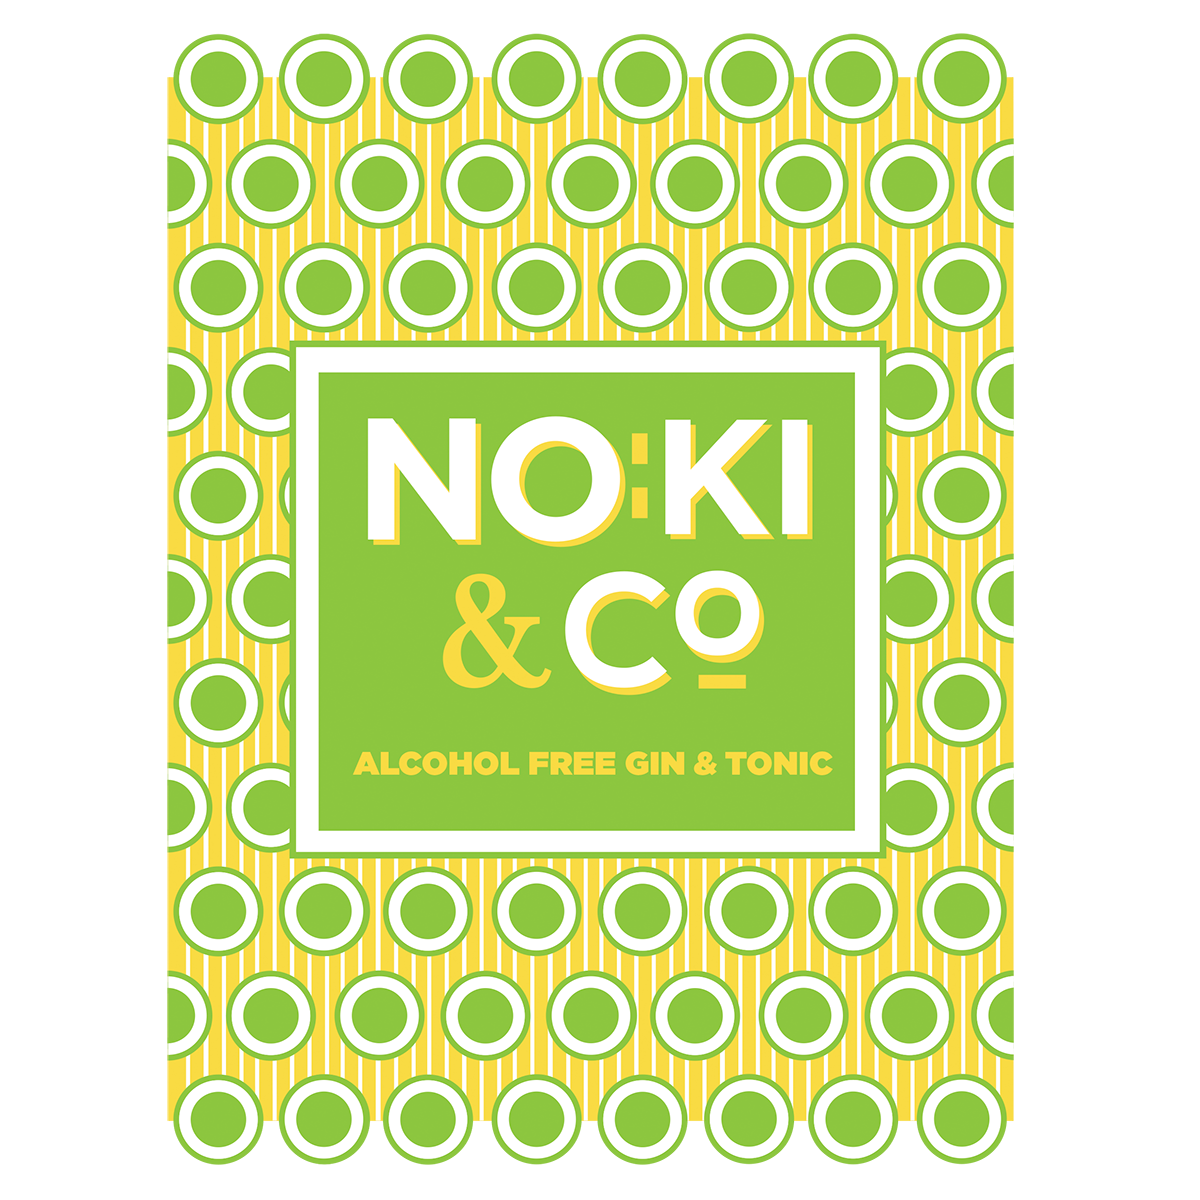 RTM Beverages has launched Ireland’s first alcohol-free G&T in Noki & Co, with an ABV of 0%.